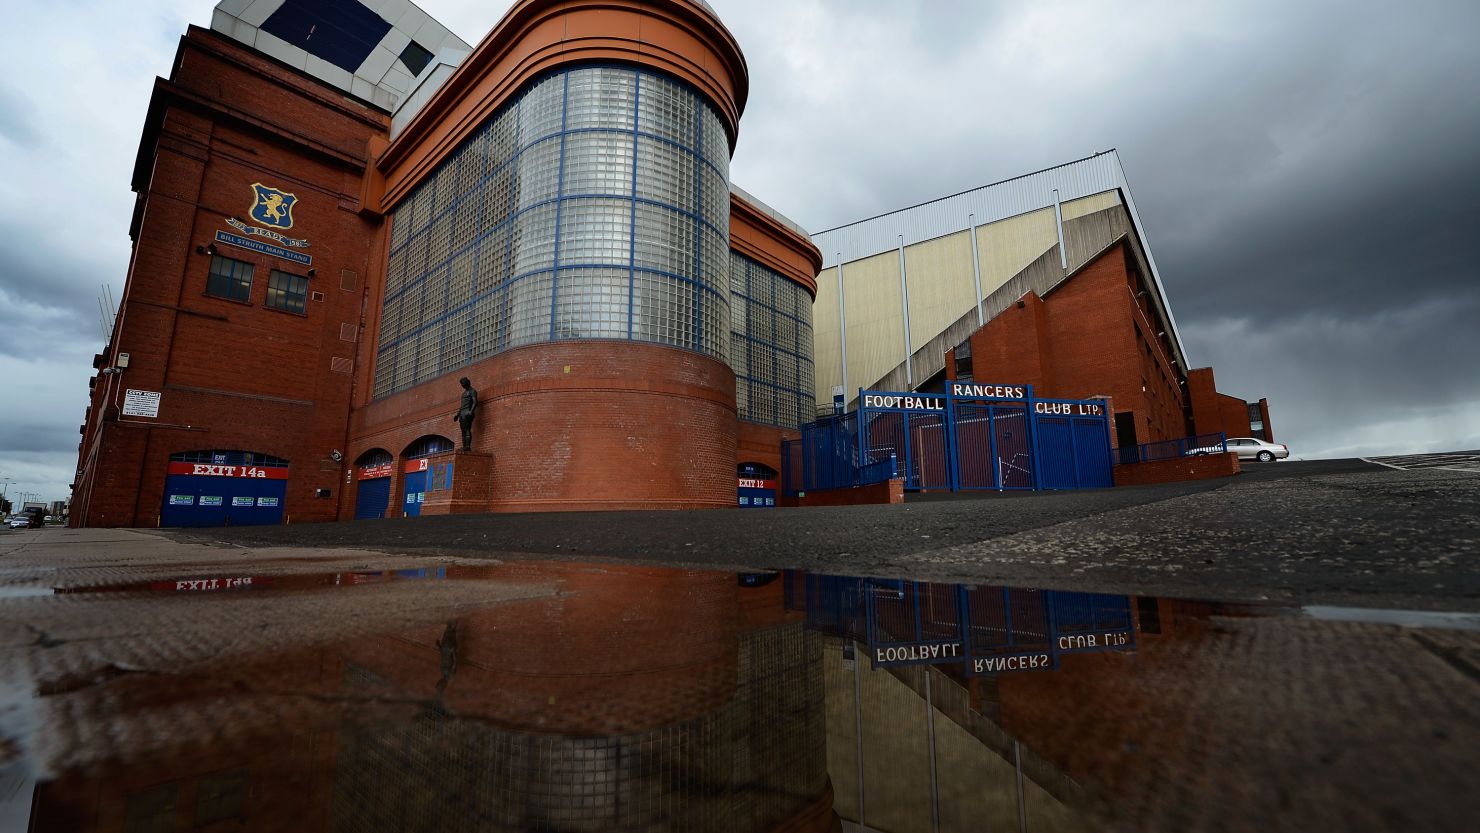 Scottish club Rangers' slide into administration in February was related to an unpaid tax bill.